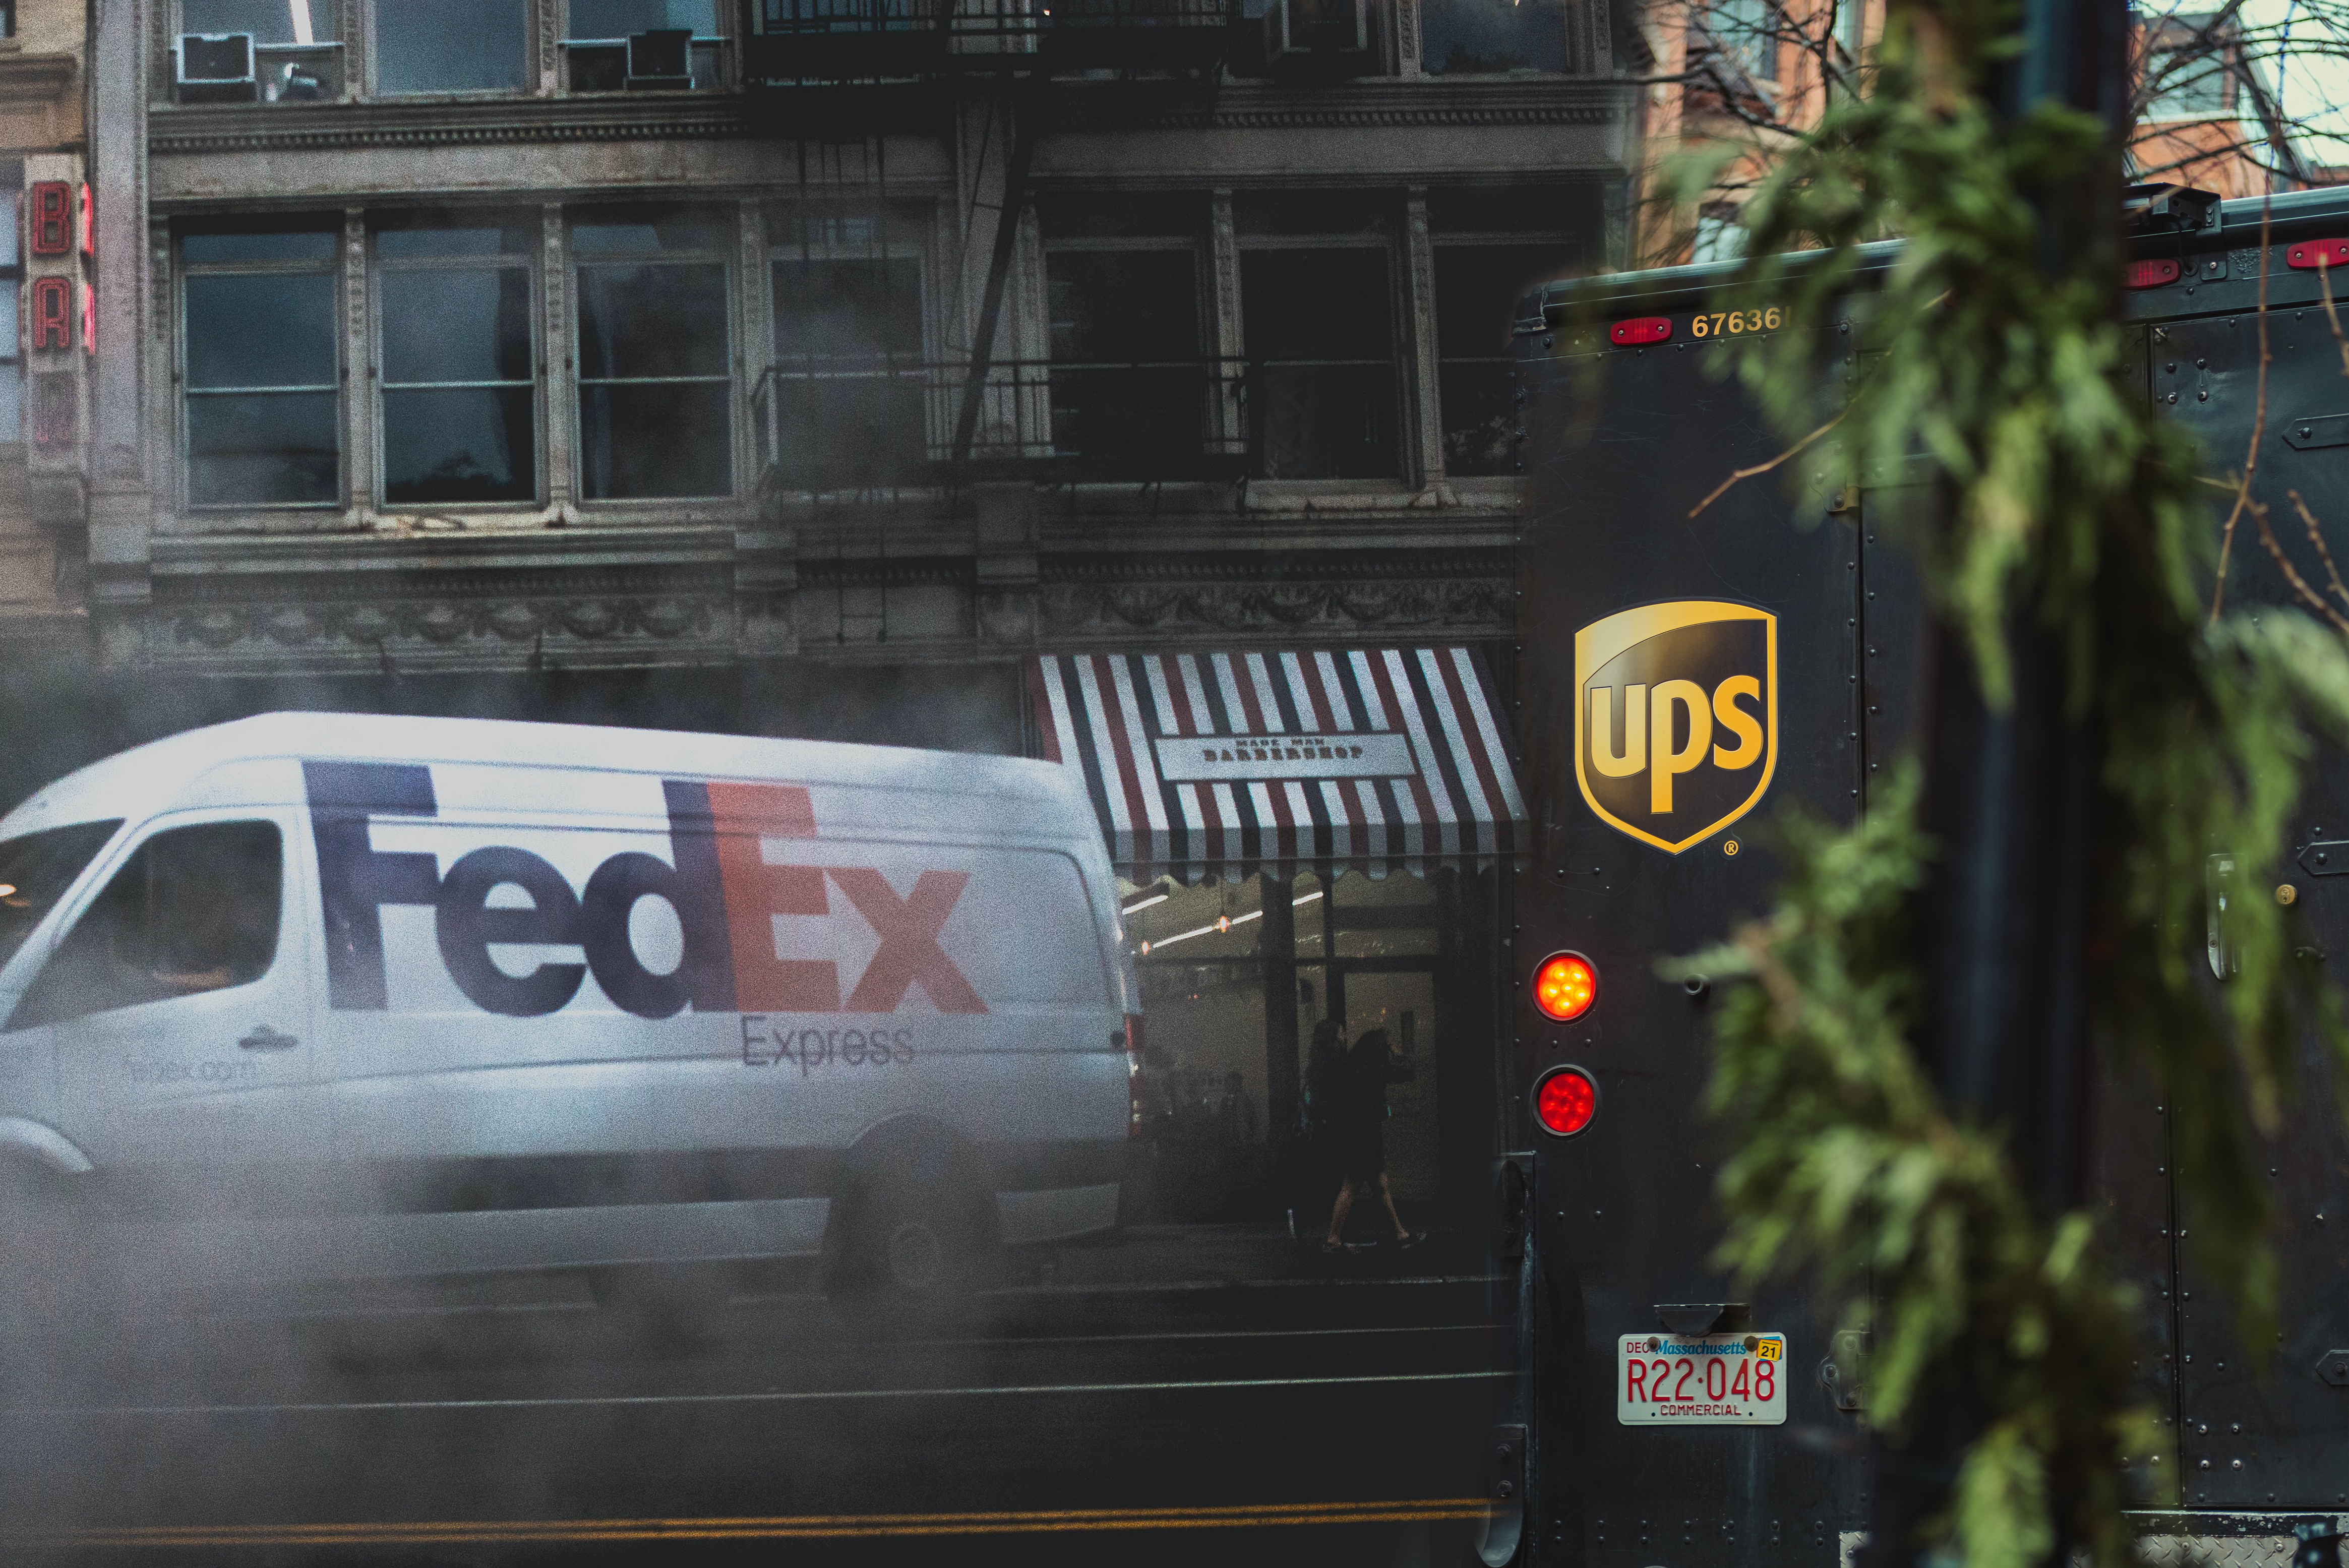 If The Drop In Demand Is Real, Why Is UPS Handling It So Much Better Than FedEx?